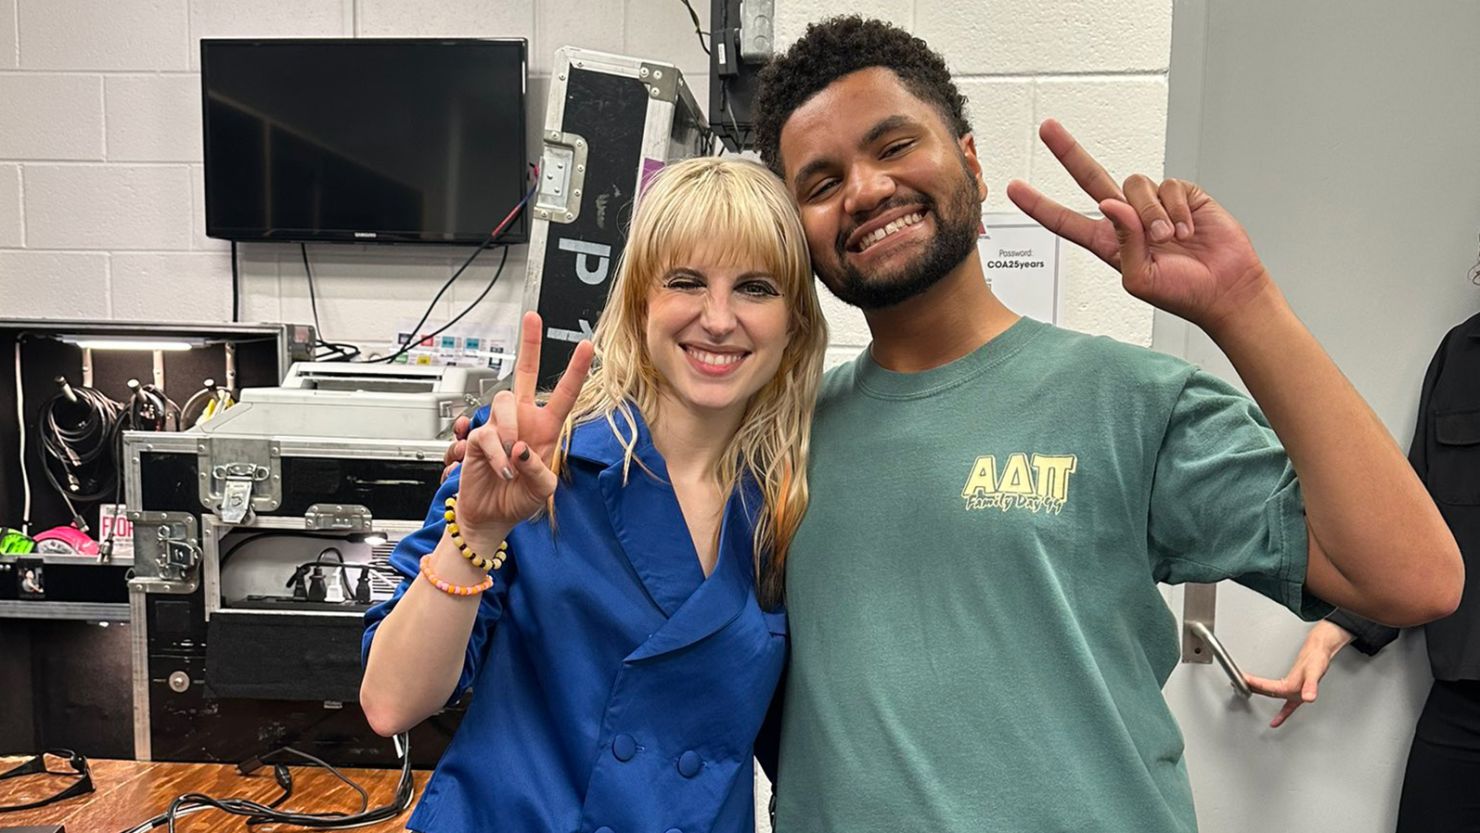 US Rep. Maxwell Frost poses with Paramore's Hayley Williams. The Florida congressman performed alongside the rock band in Washington, DC on Friday night.